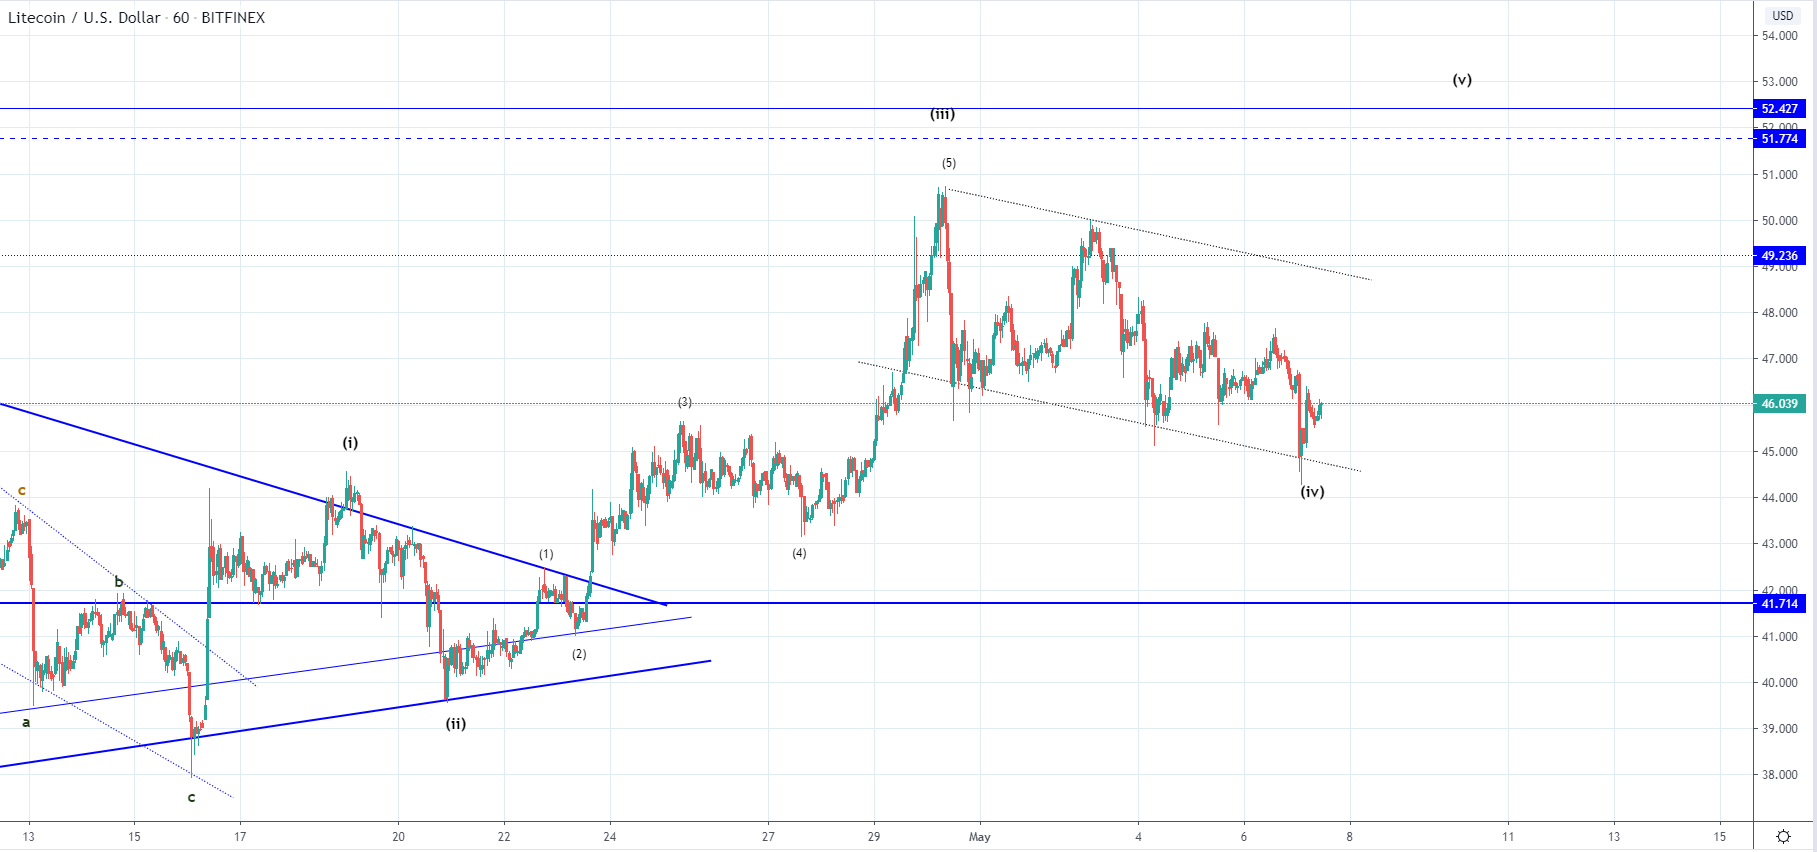 LTC and EOS in a descending range